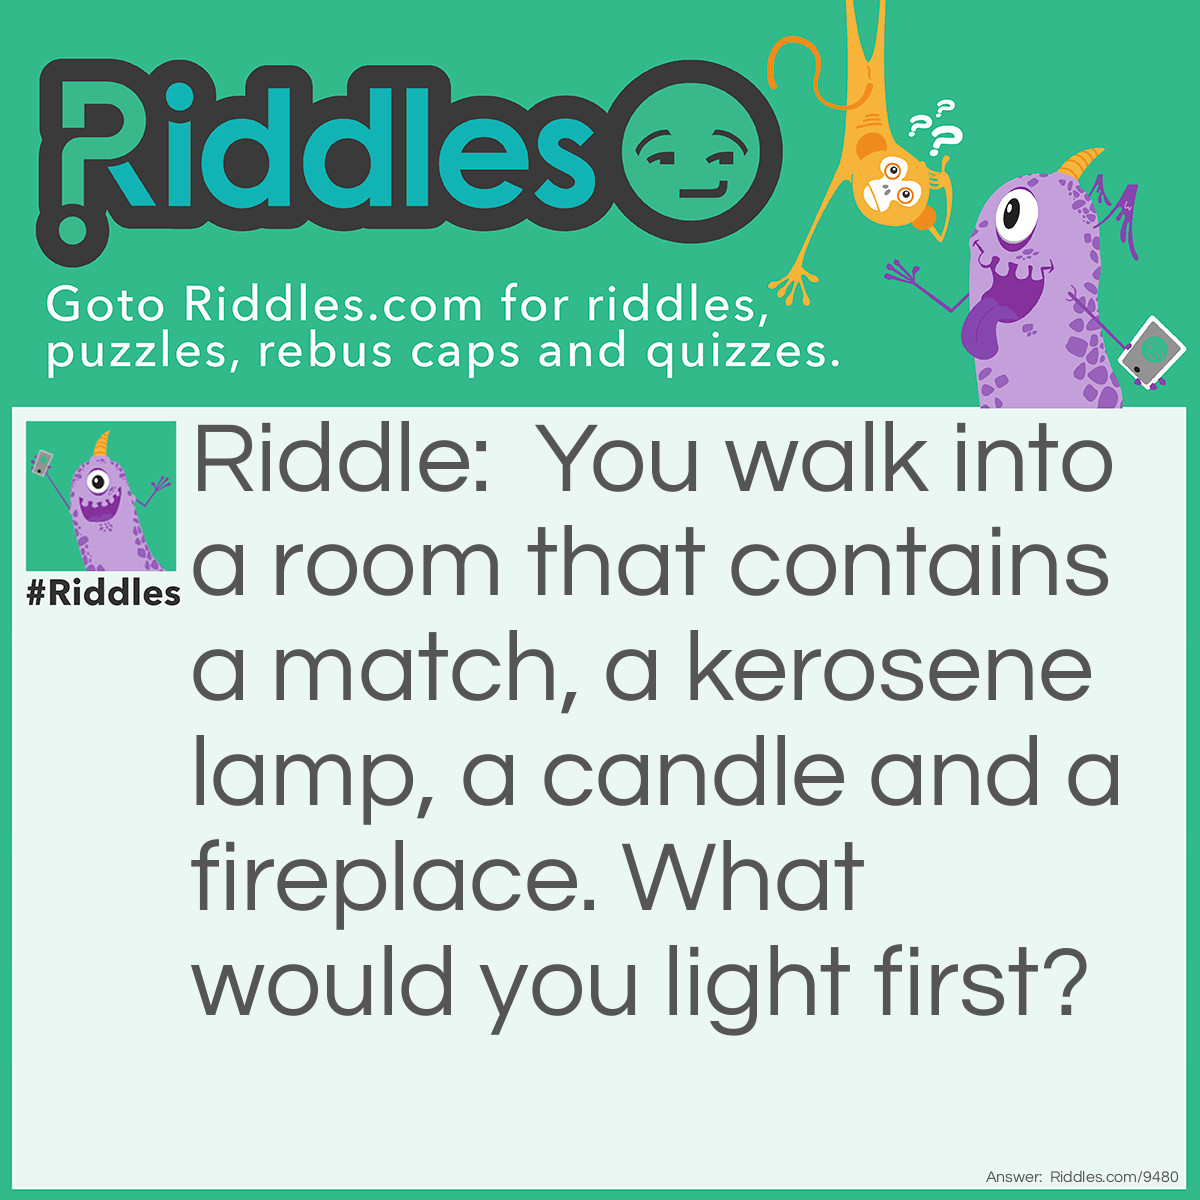 Riddle: You walk into a room that contains a match, a kerosene lamp, a candle and a fireplace. What would you light first? Answer: The match.